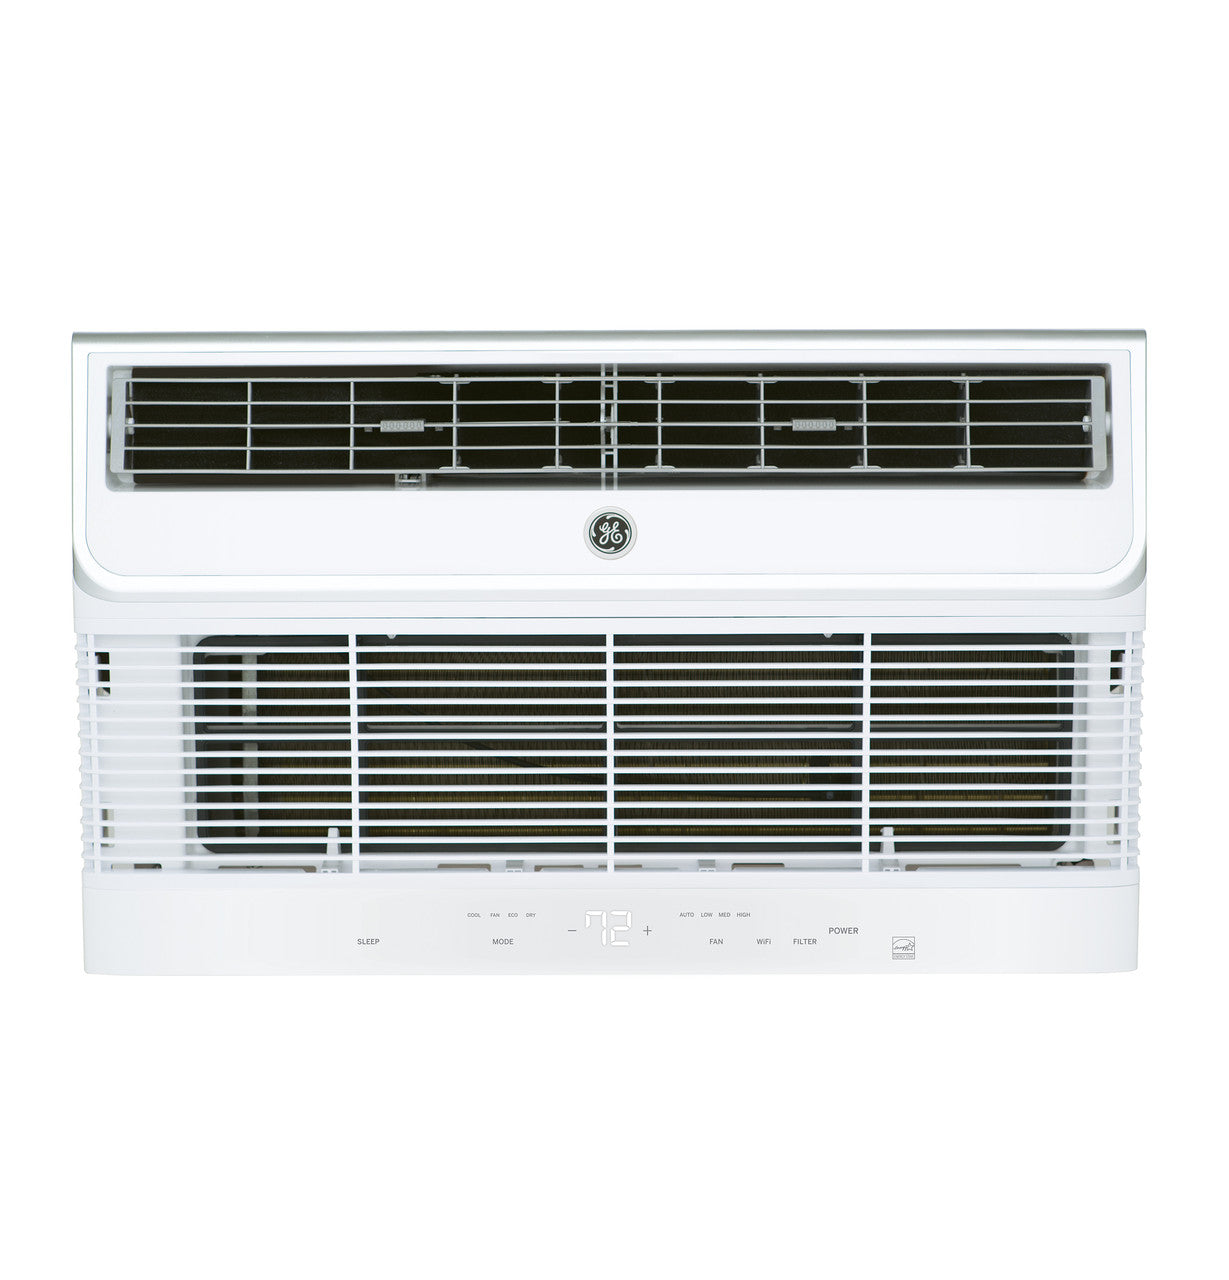 GE 12,000 BTU 208/230 Volt Through-the-Wall Air Conditioner: Cooling Only - AJCM12DWJ